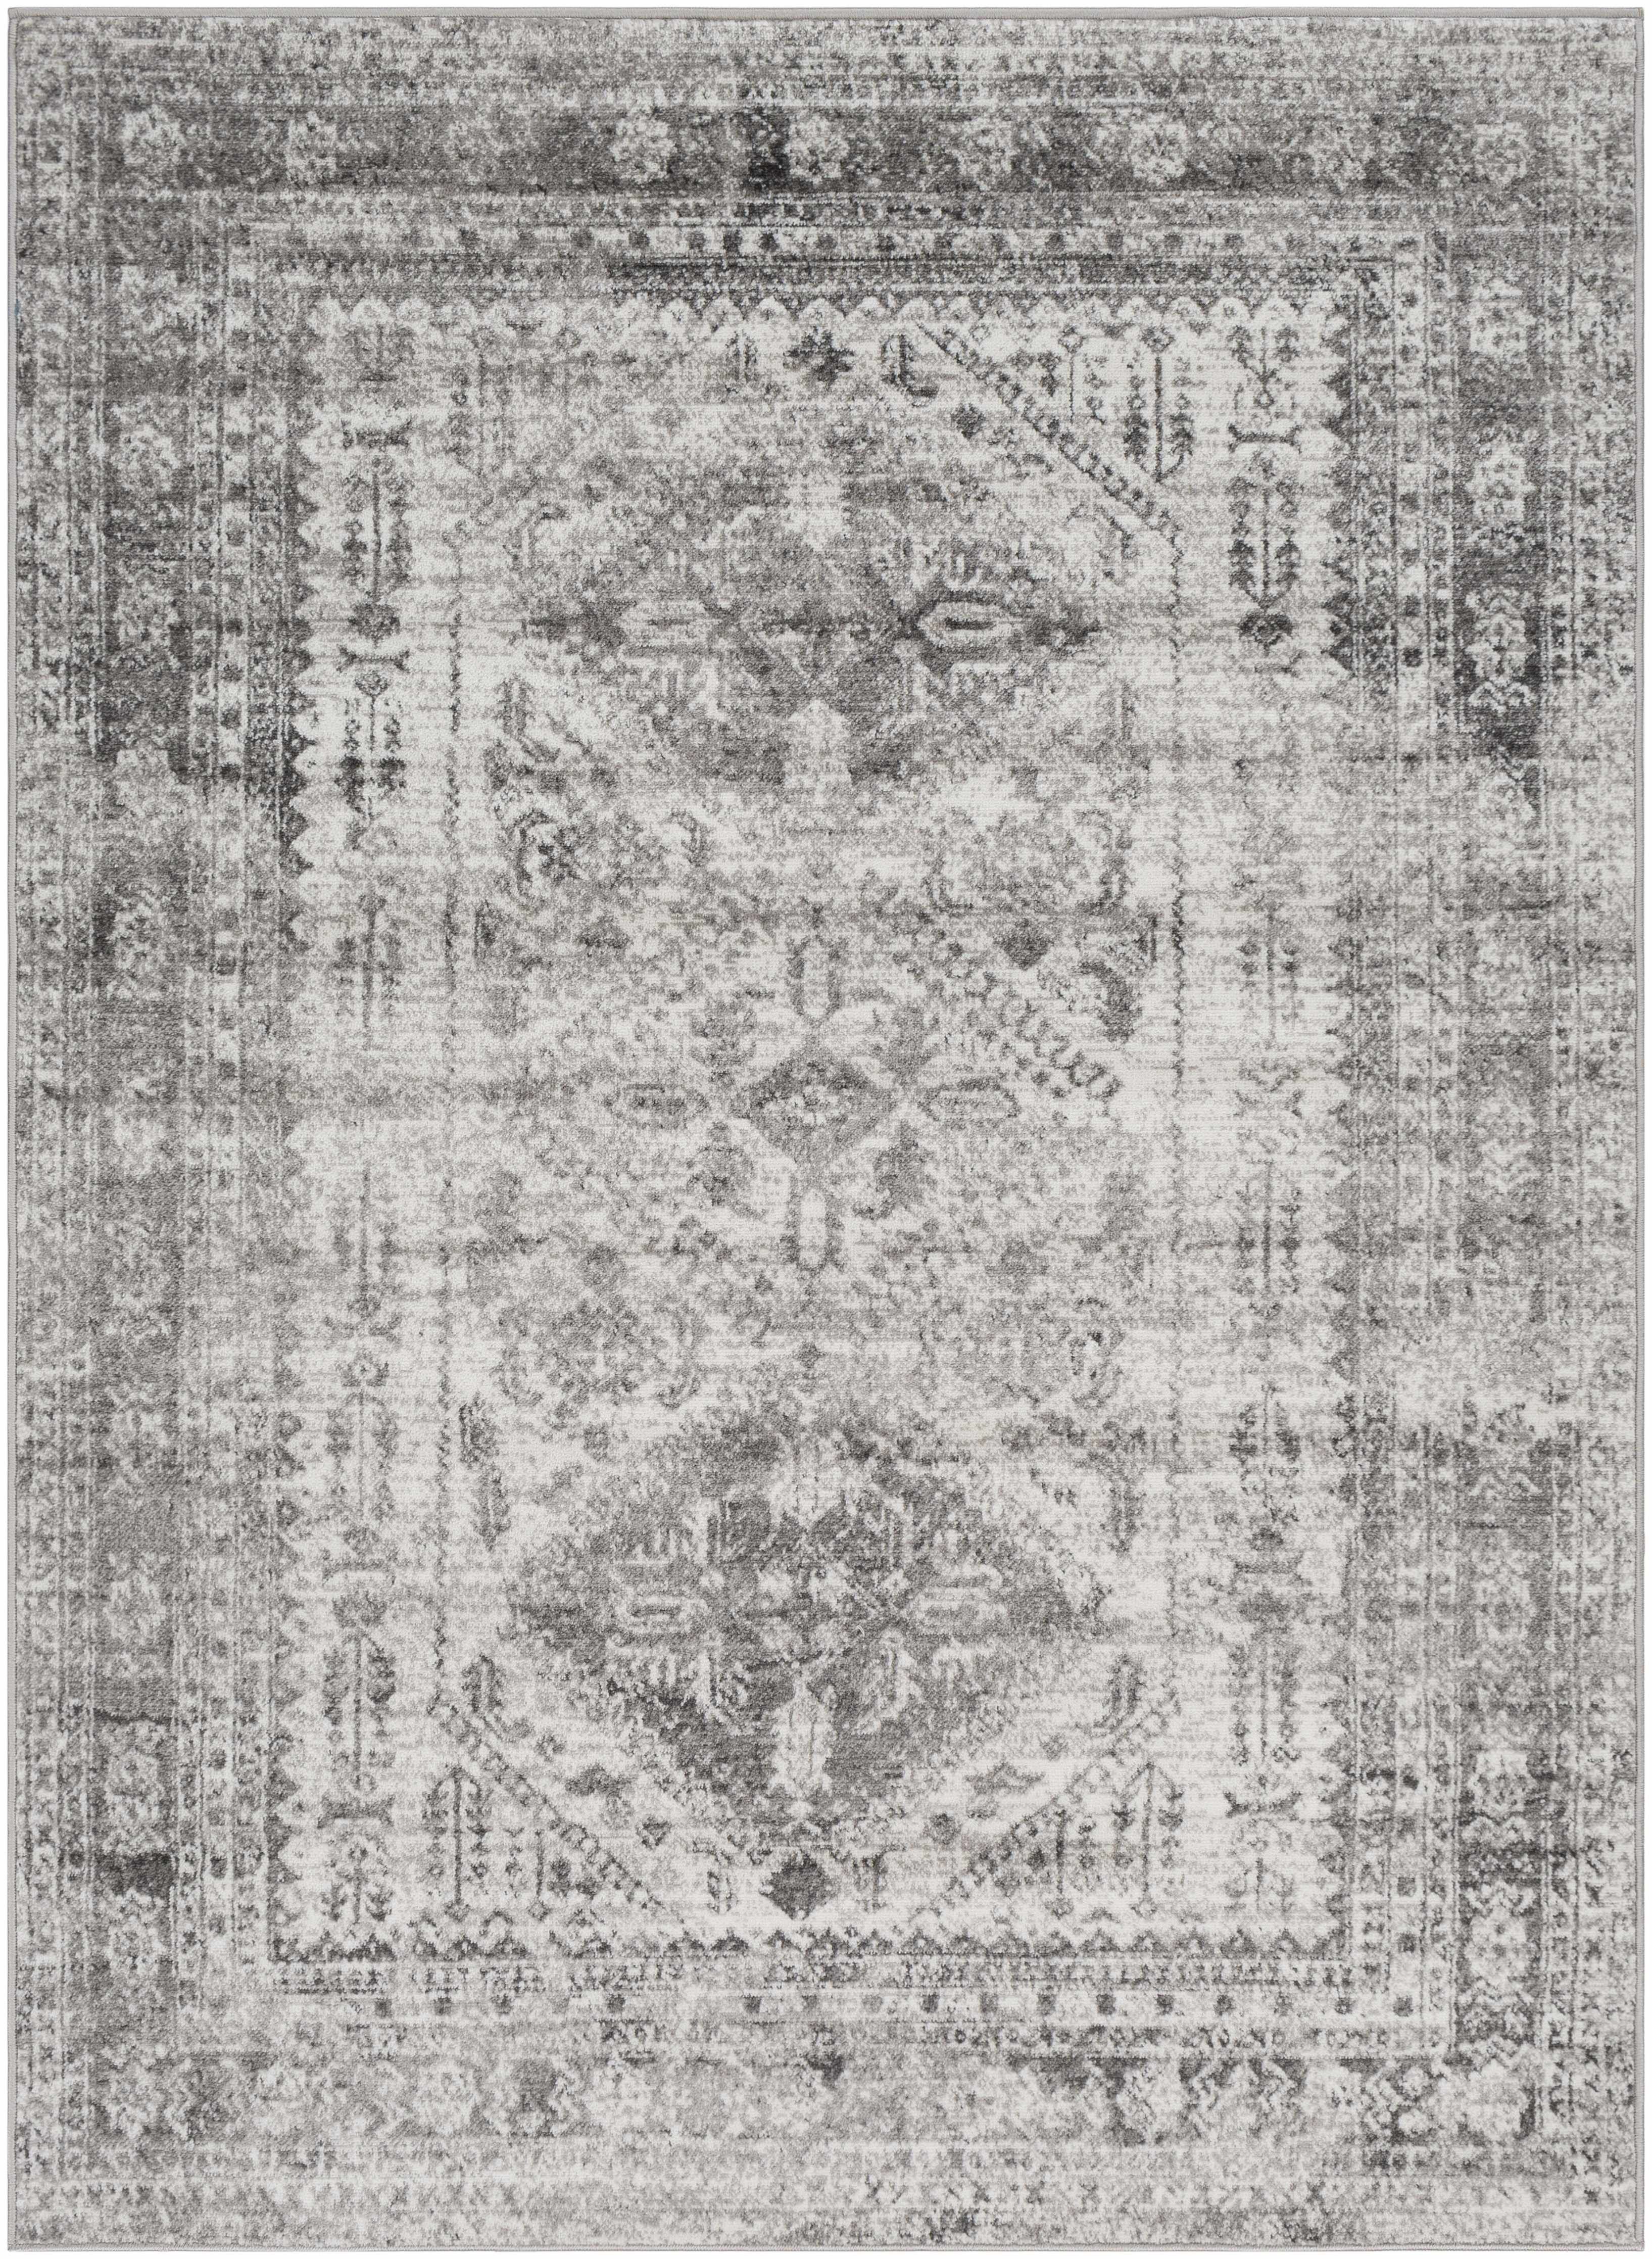 Nelsonville Area Rug | Boutique Rugs